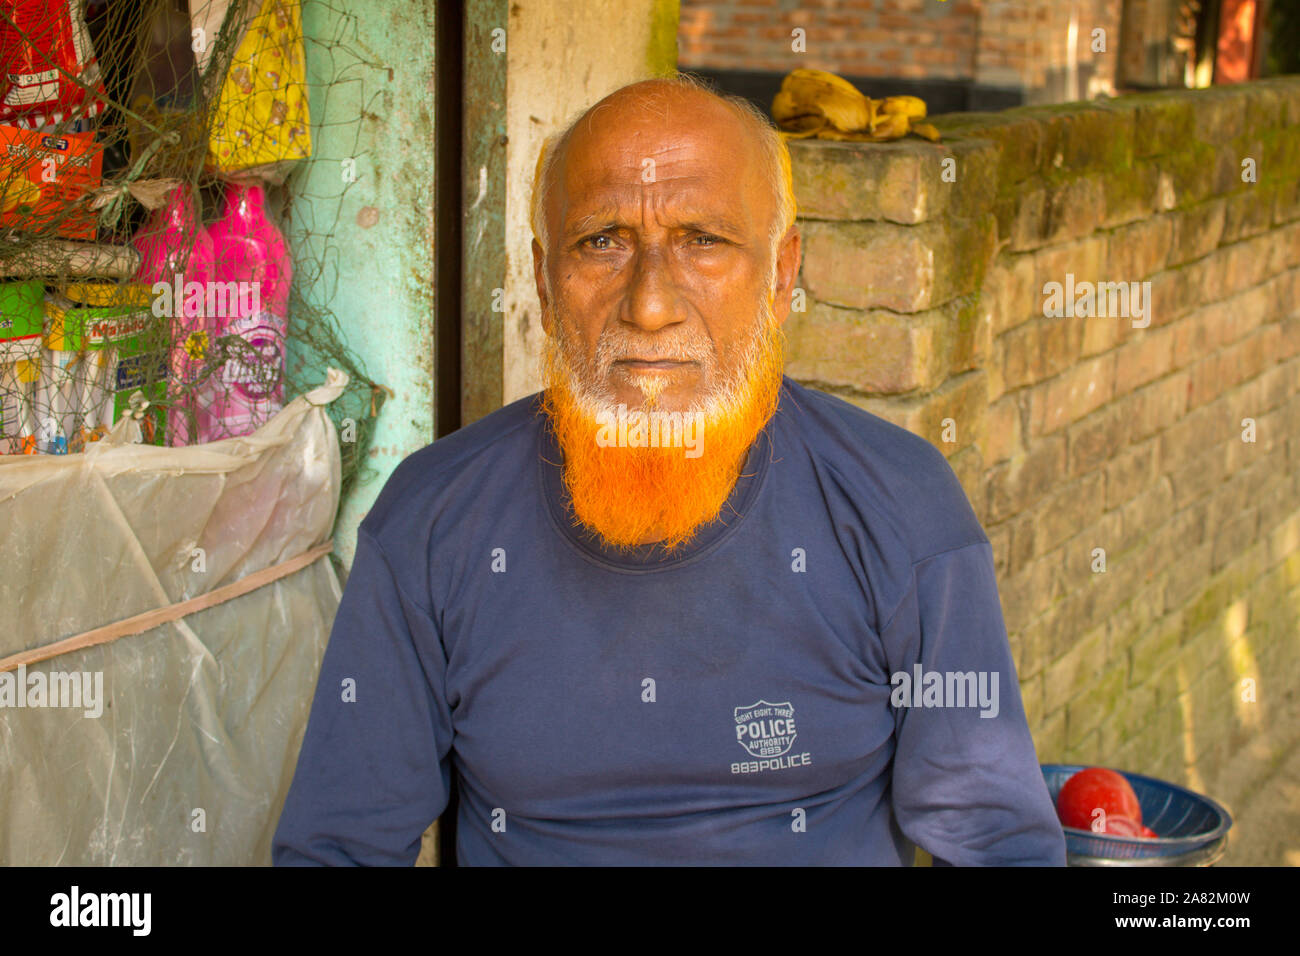 South Asian Old Man With Gray Beard and Bald Head Stock Photo